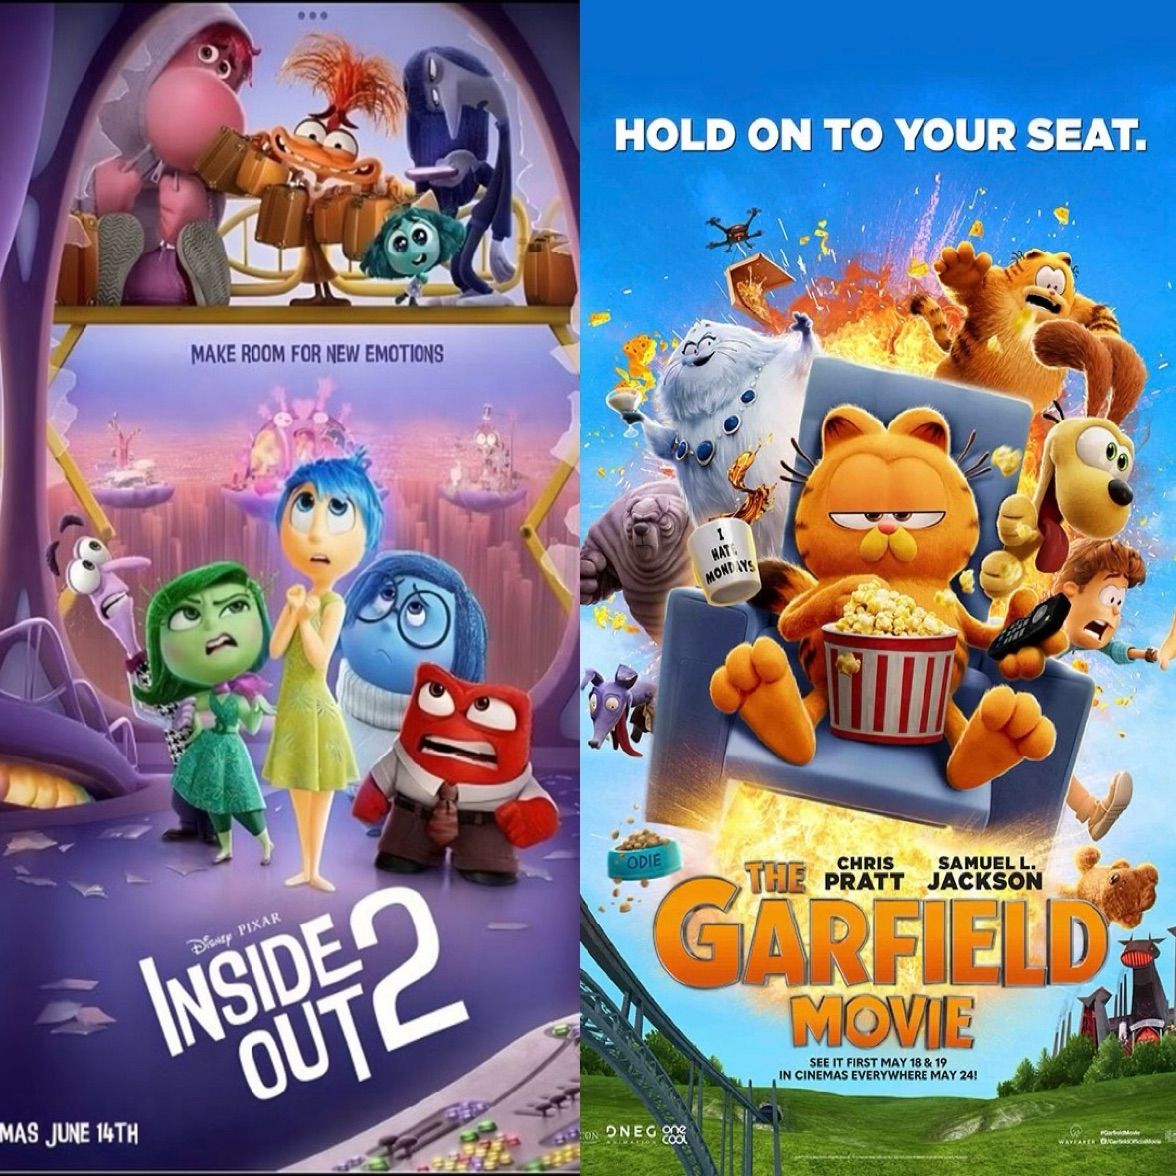 INSIDE OUT 2 with THE GARFIELD MOVIE \ud83c\udf5d